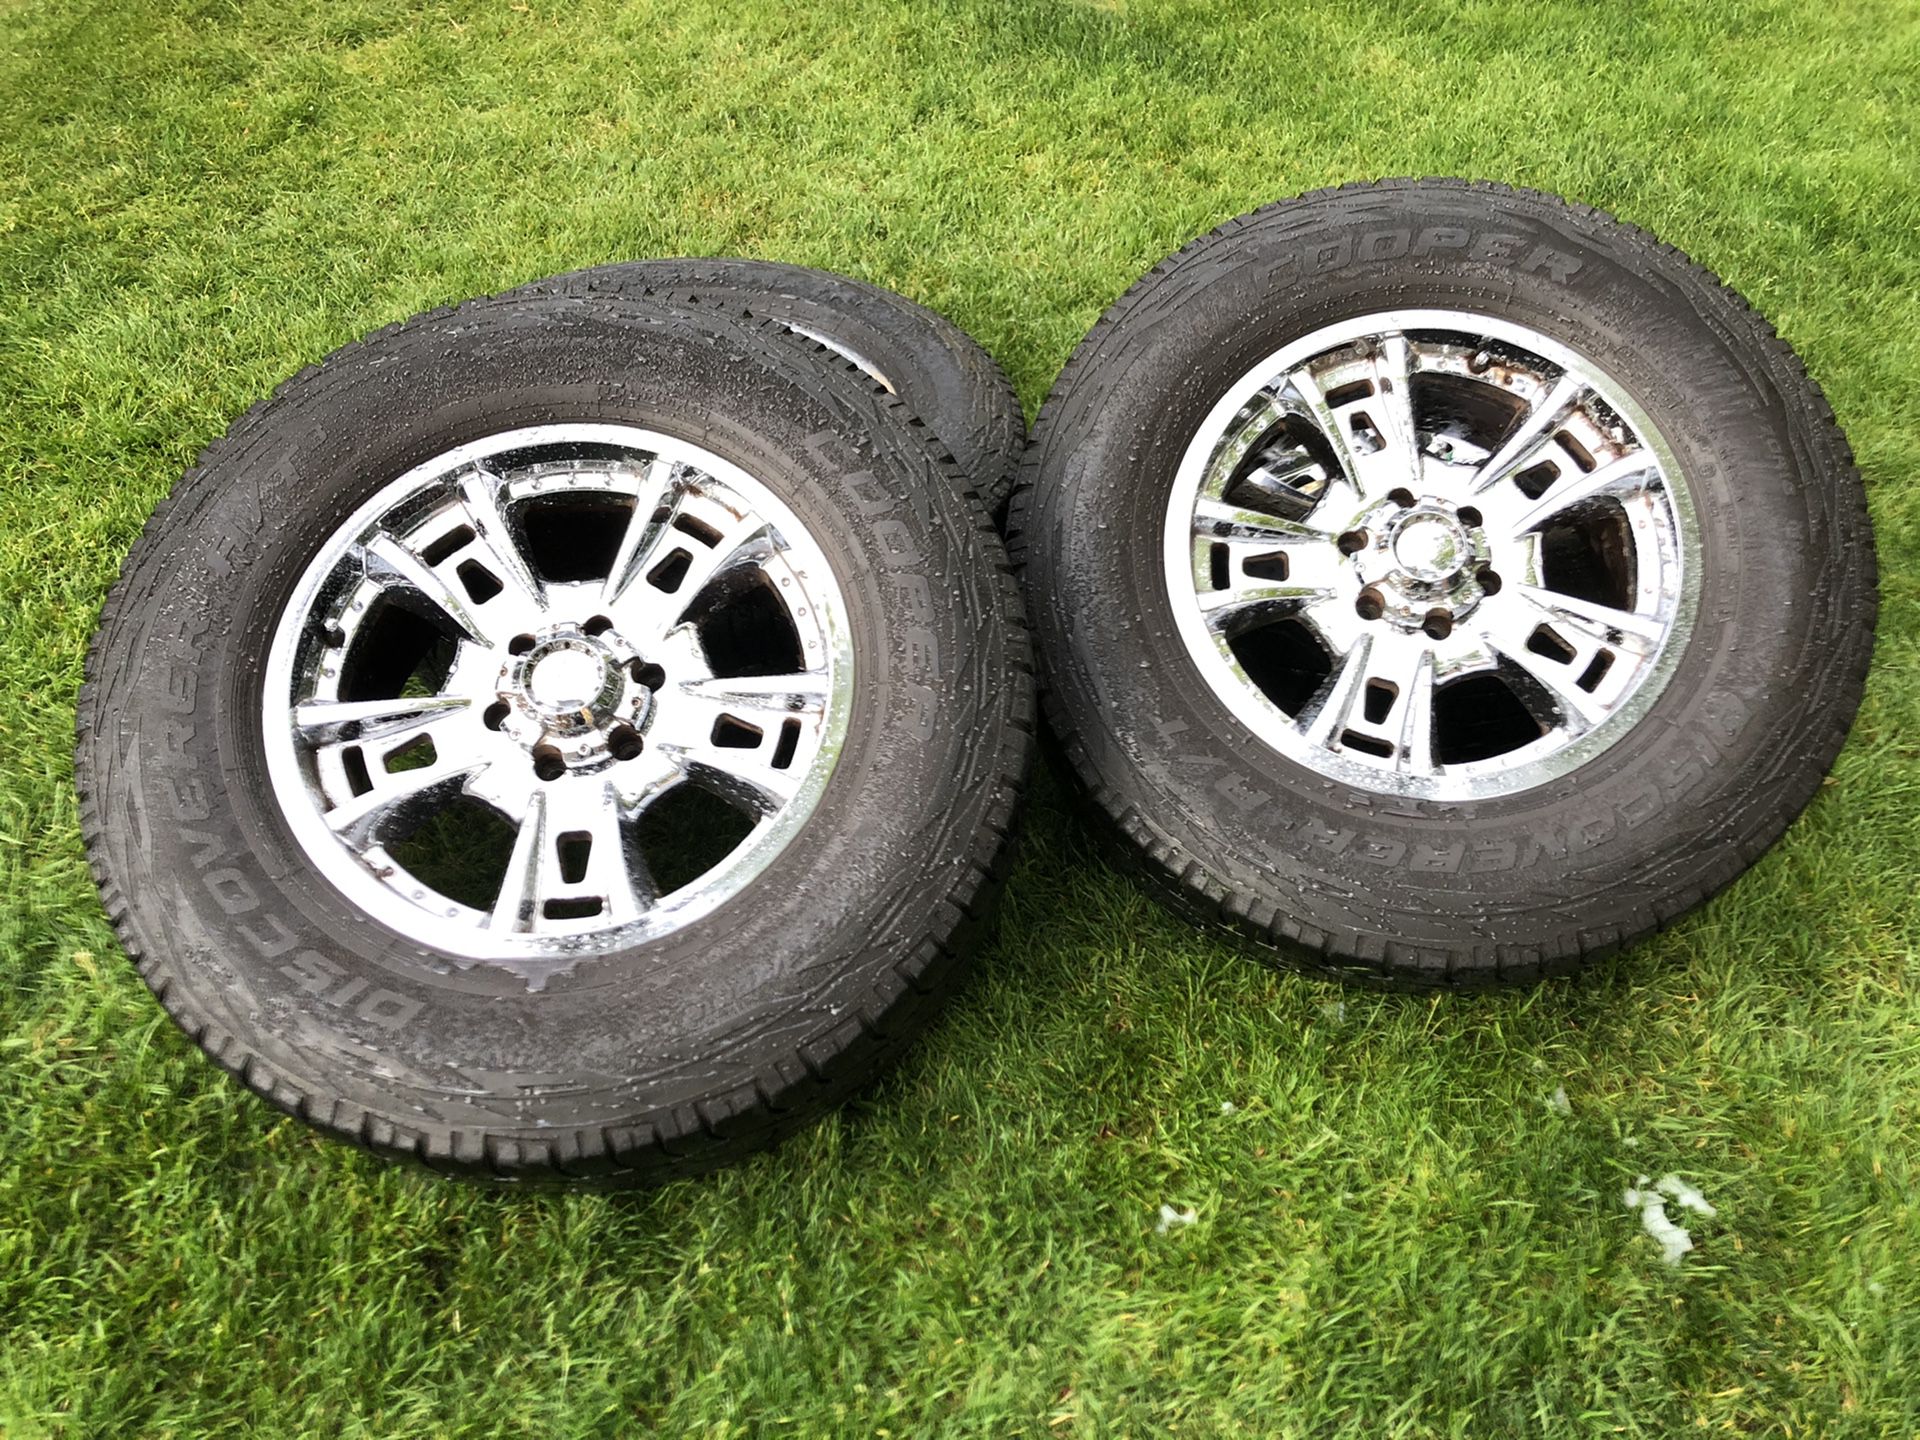 Great set of Full-sized truck or SUV wheels and tires